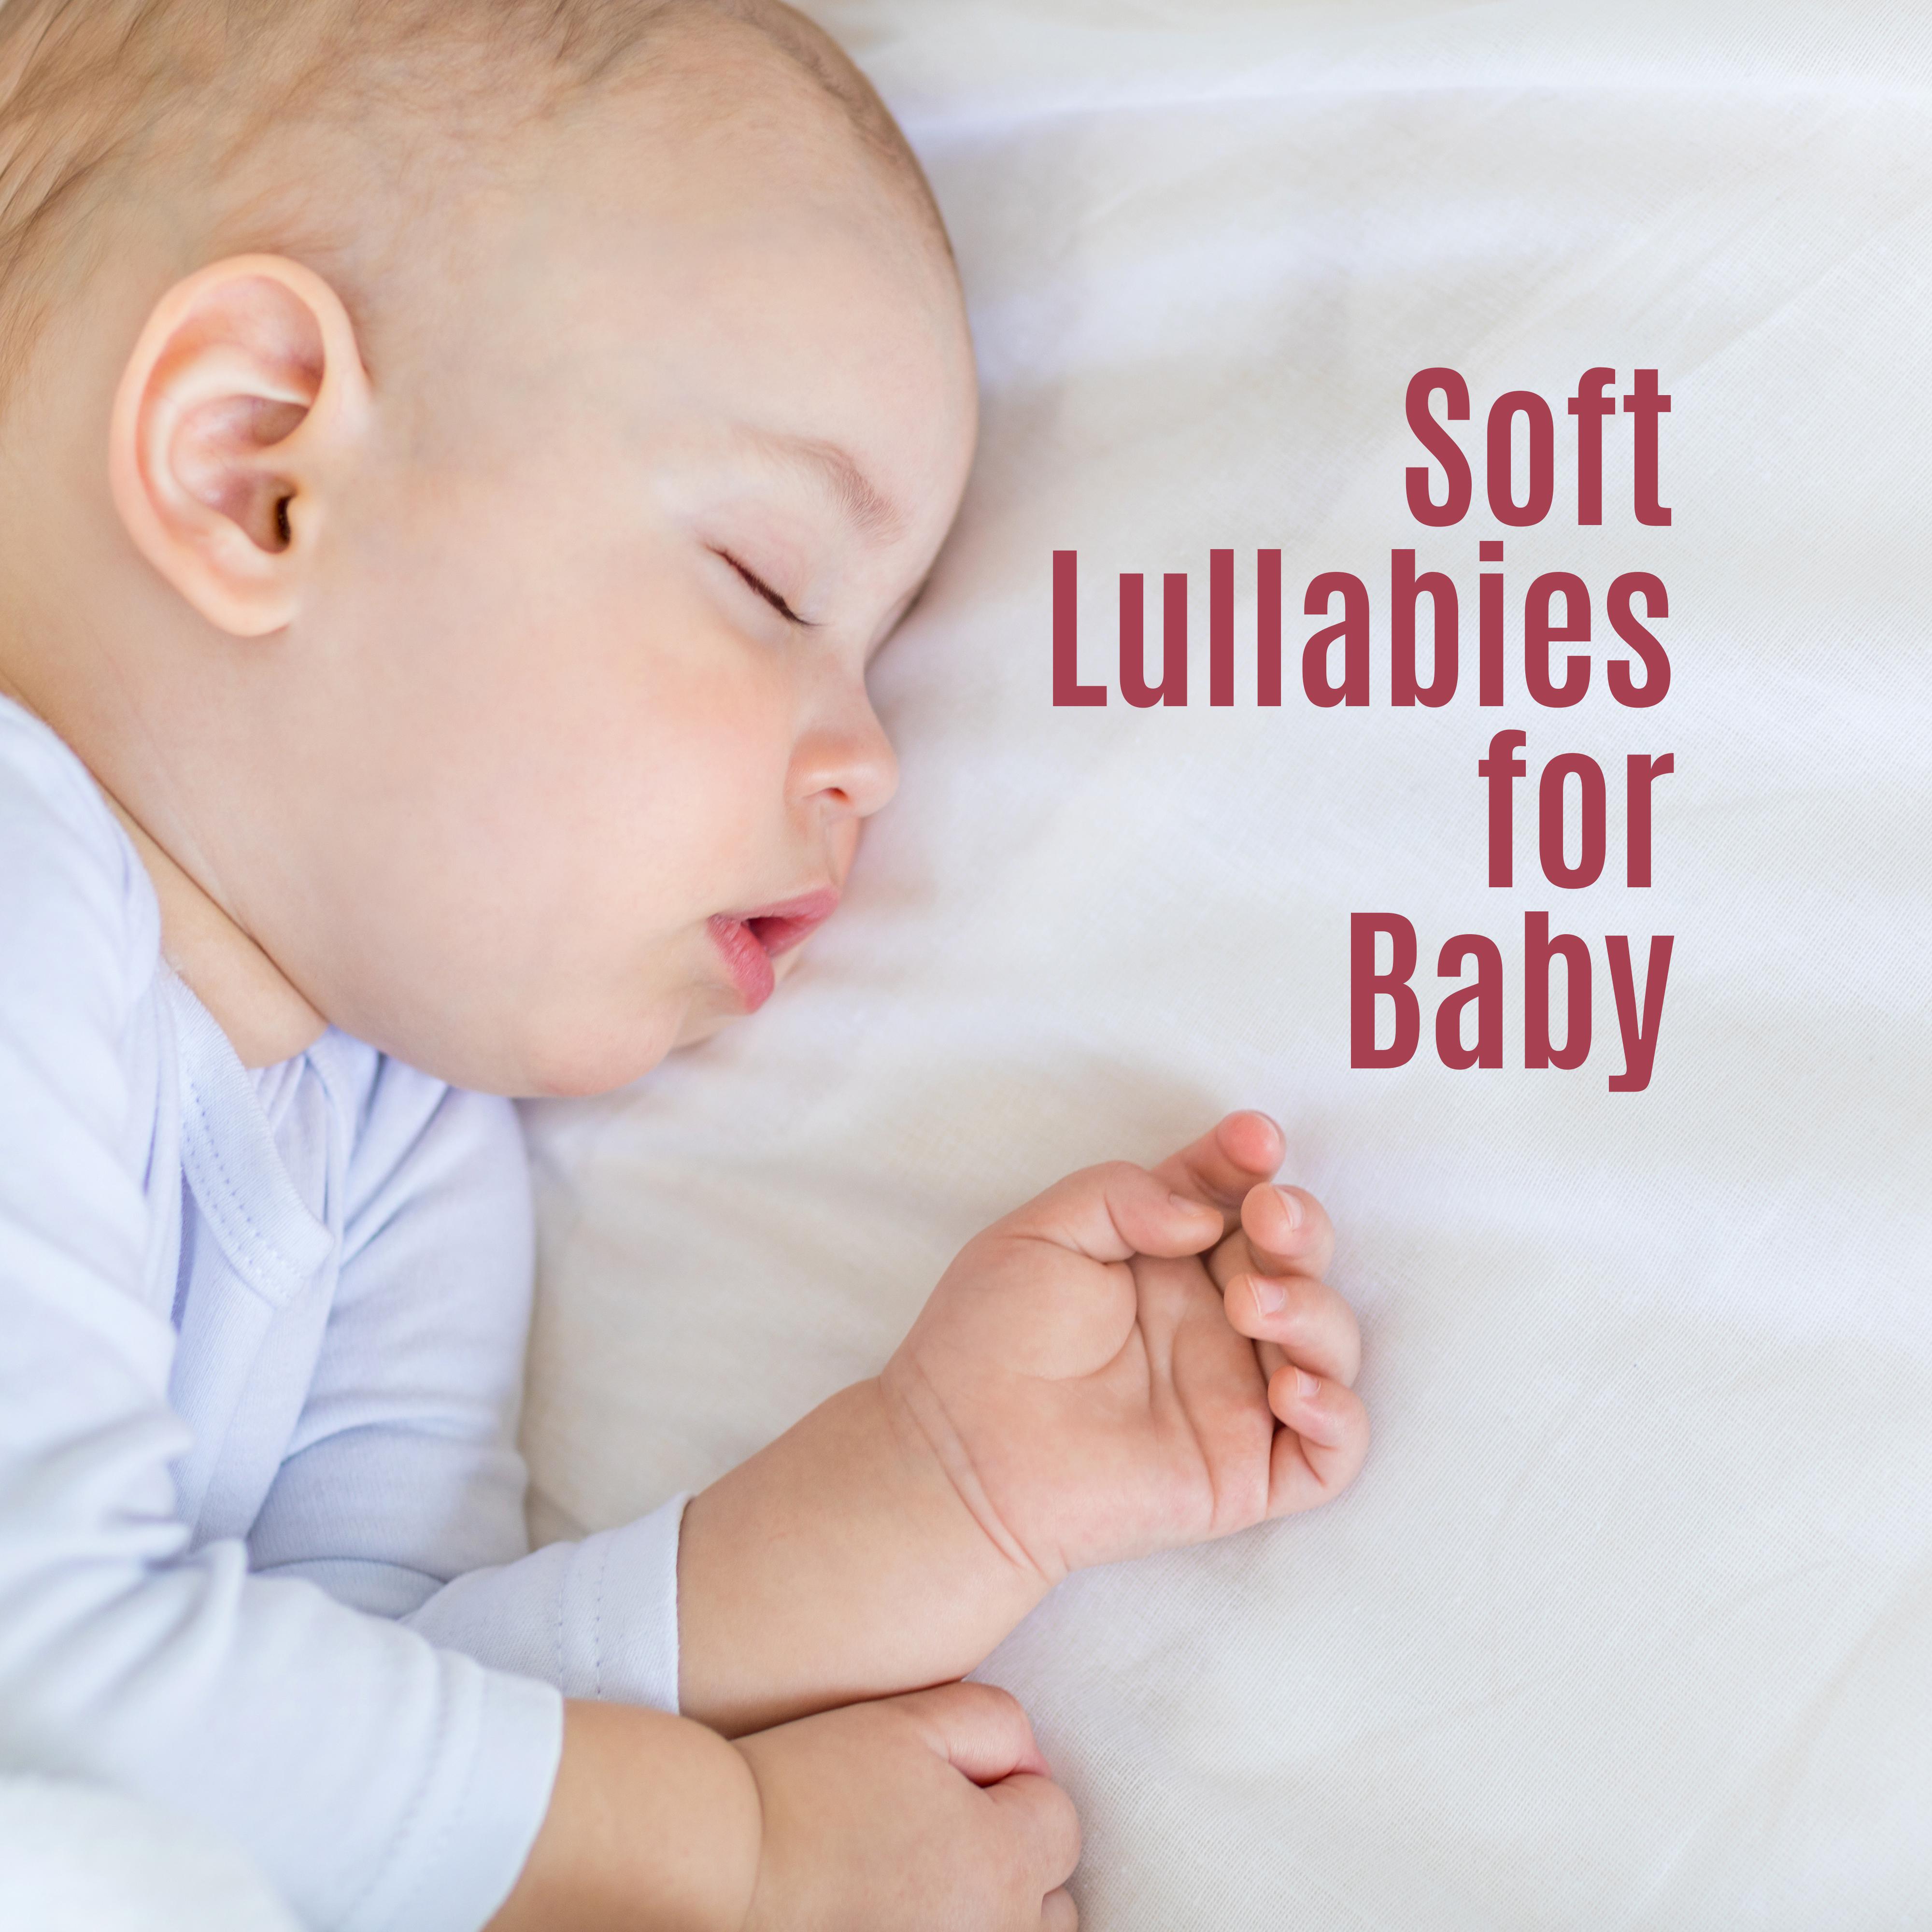 Soft Lullabies for Baby: Smooth Music to Pillow, Jazz Lullabies, Sounds of Nature at Night, Relaxed Baby, Piano Relaxation